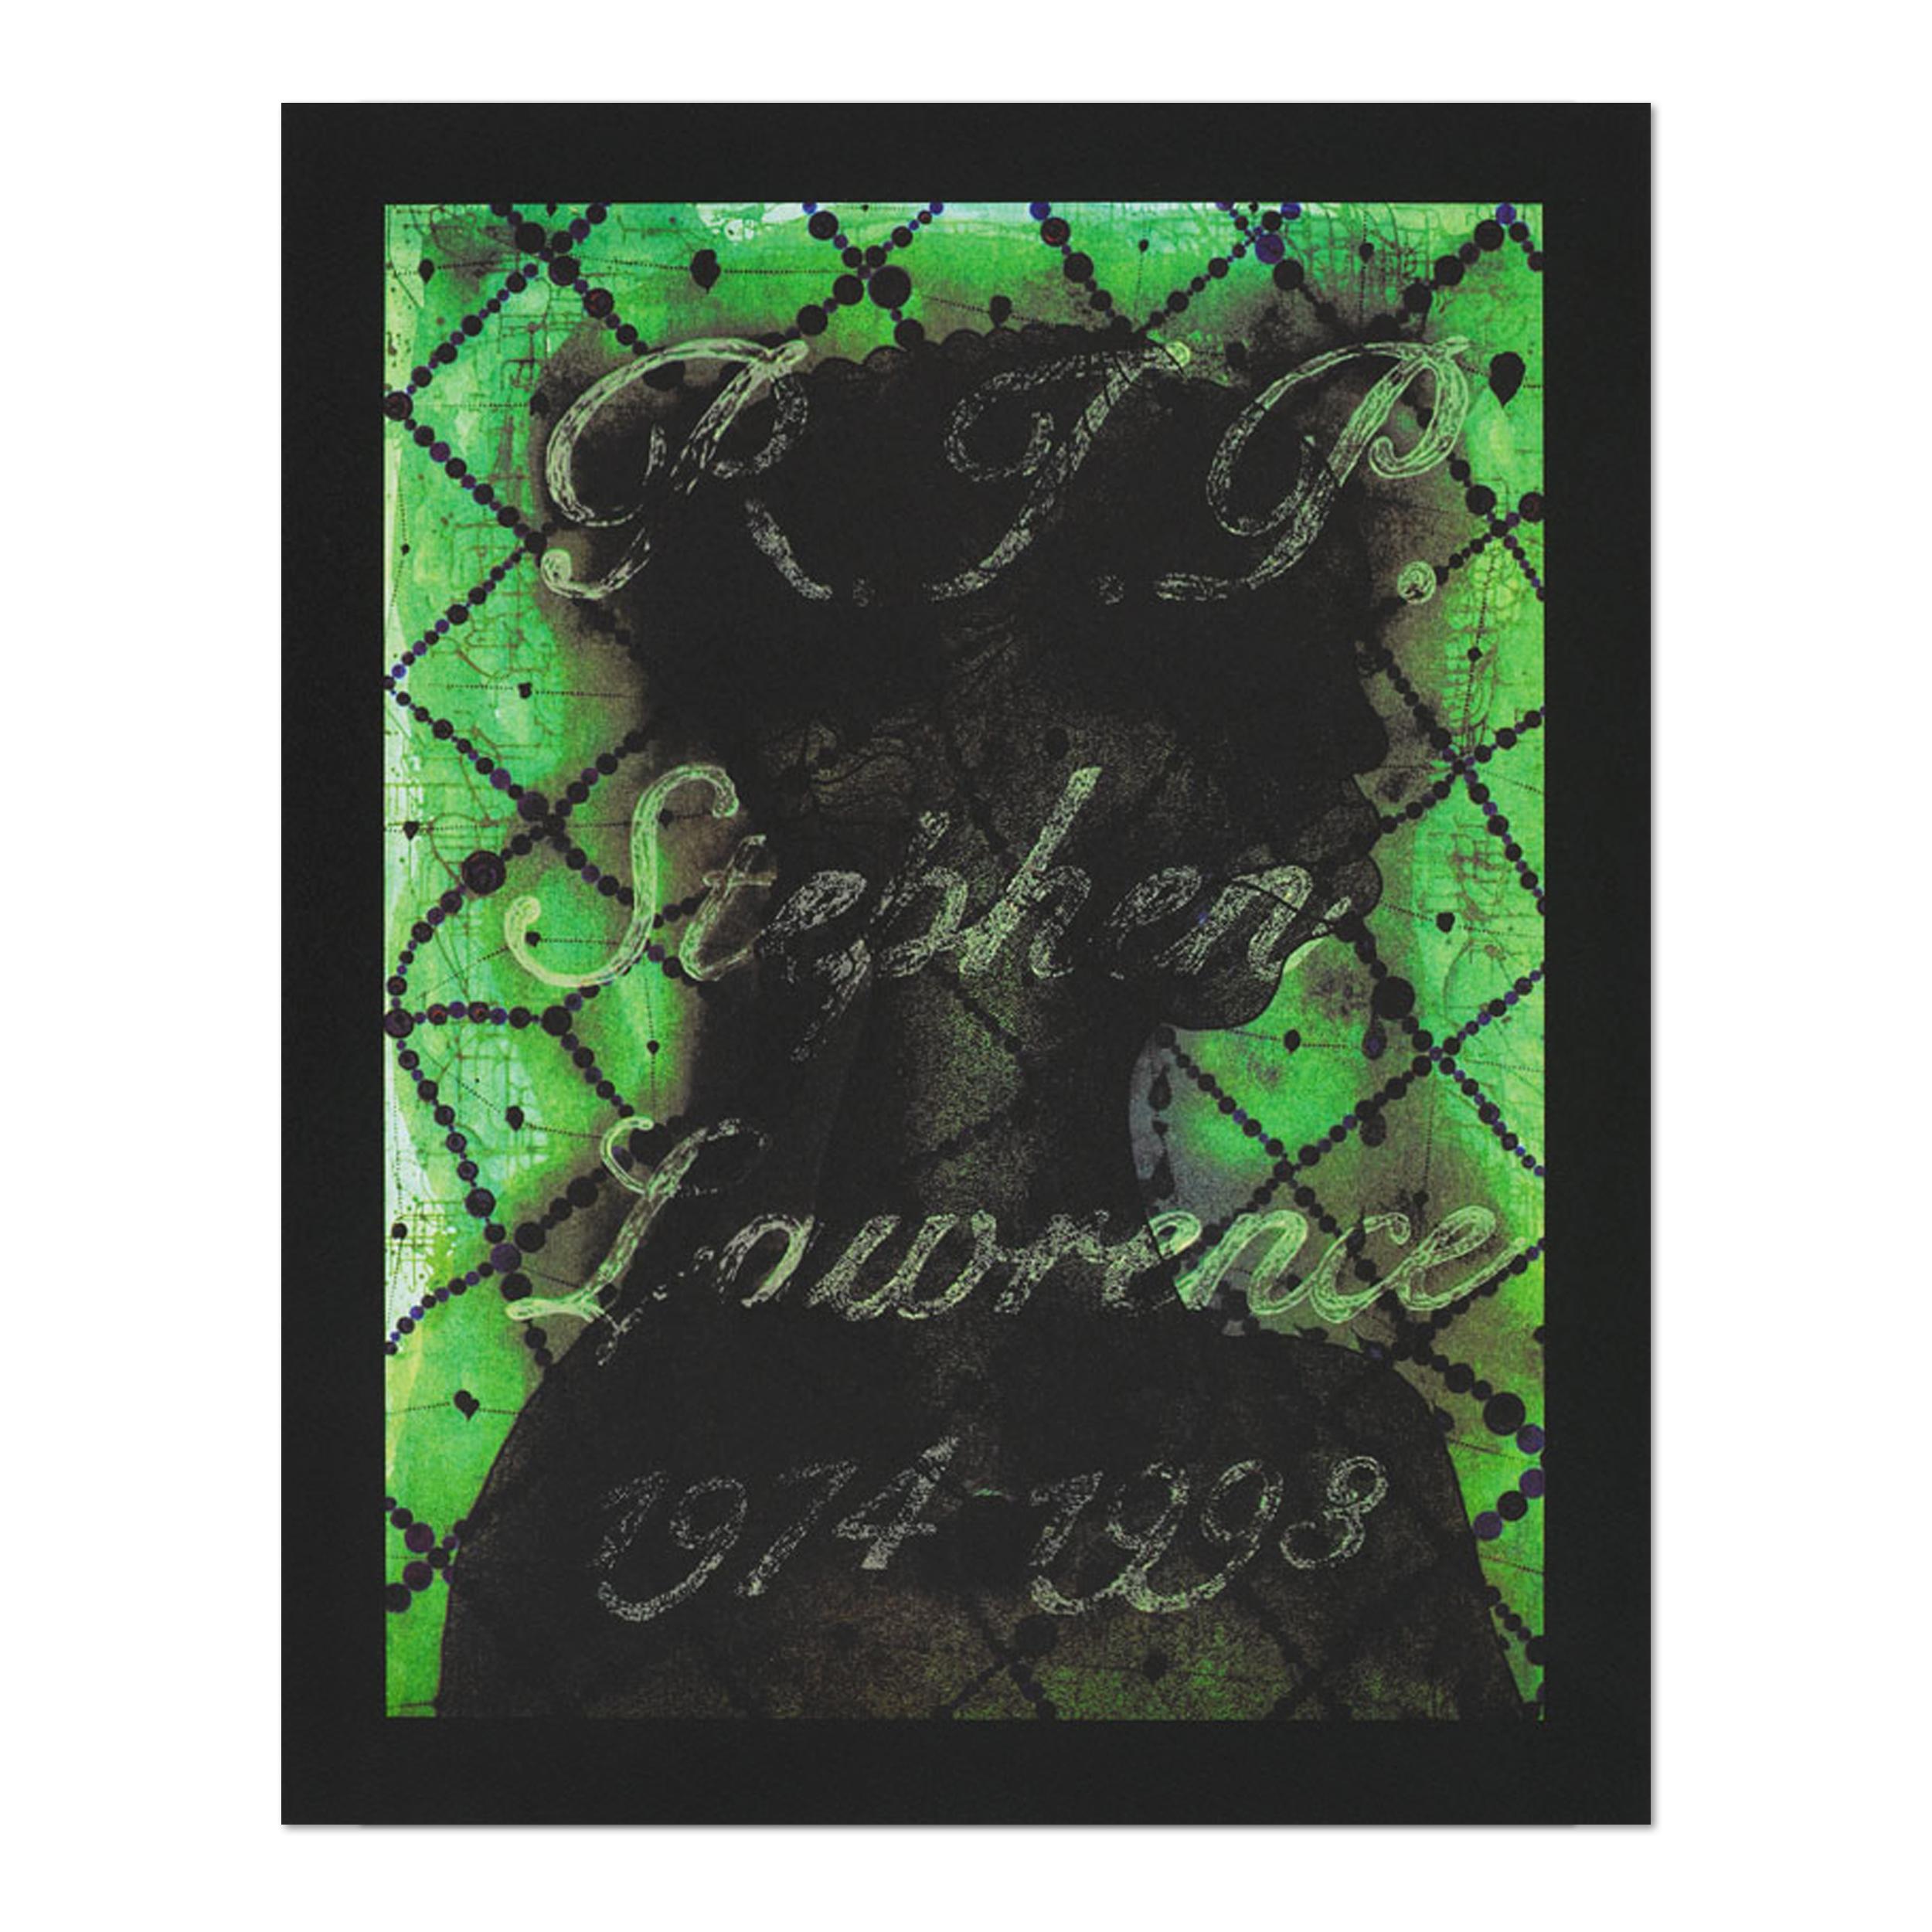 Chris Ofili (born 1968 in Manchester)
R.I.P. Stephen Lawrence 1974 – 1993, 2013
Medium: Lithograph and photoluminescent silkscreen on paper
Size: 45 x 35.6 cm (17.7 x 14 in)
Edition of 100: Hand signed and numbered on accompanied certificate of